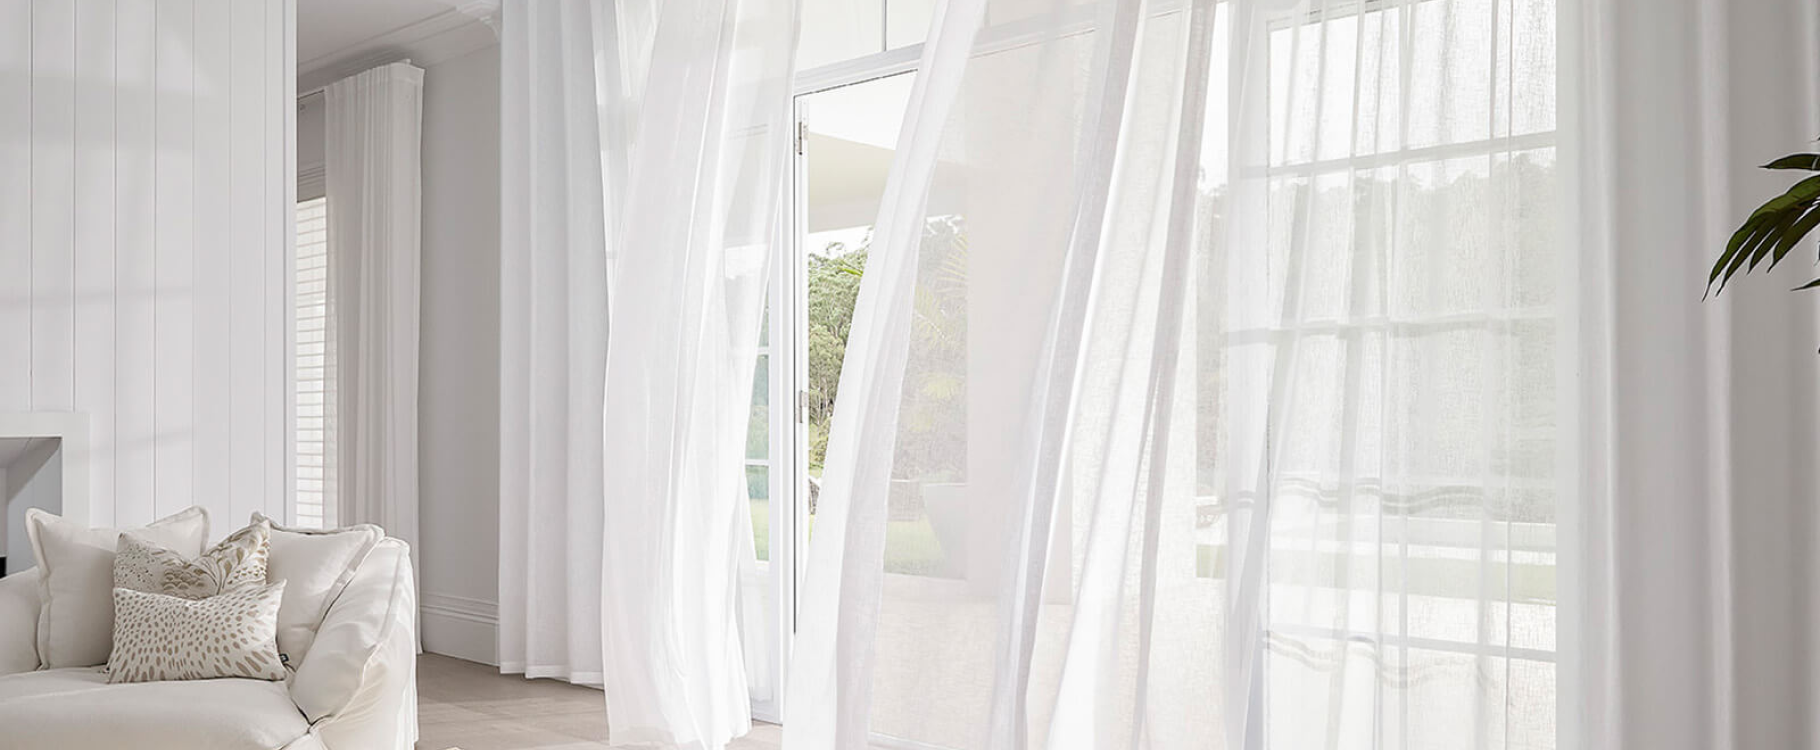 How to layer sheer and blockout curtains?